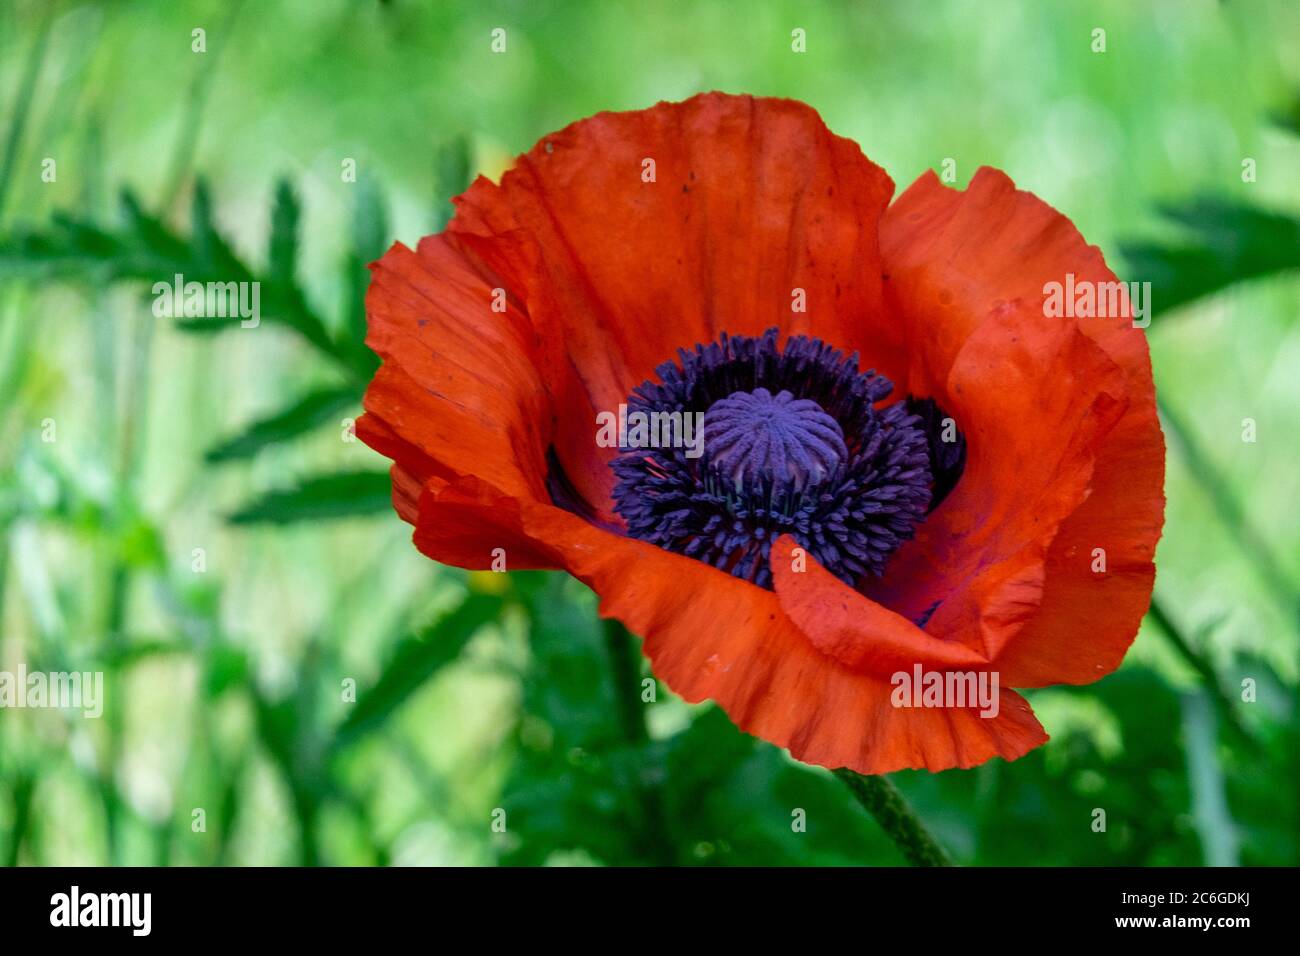 A macro of a single flowering plant, a poppy, which has a tall stem, long leaves and is among grass in a garden. Stock Photo